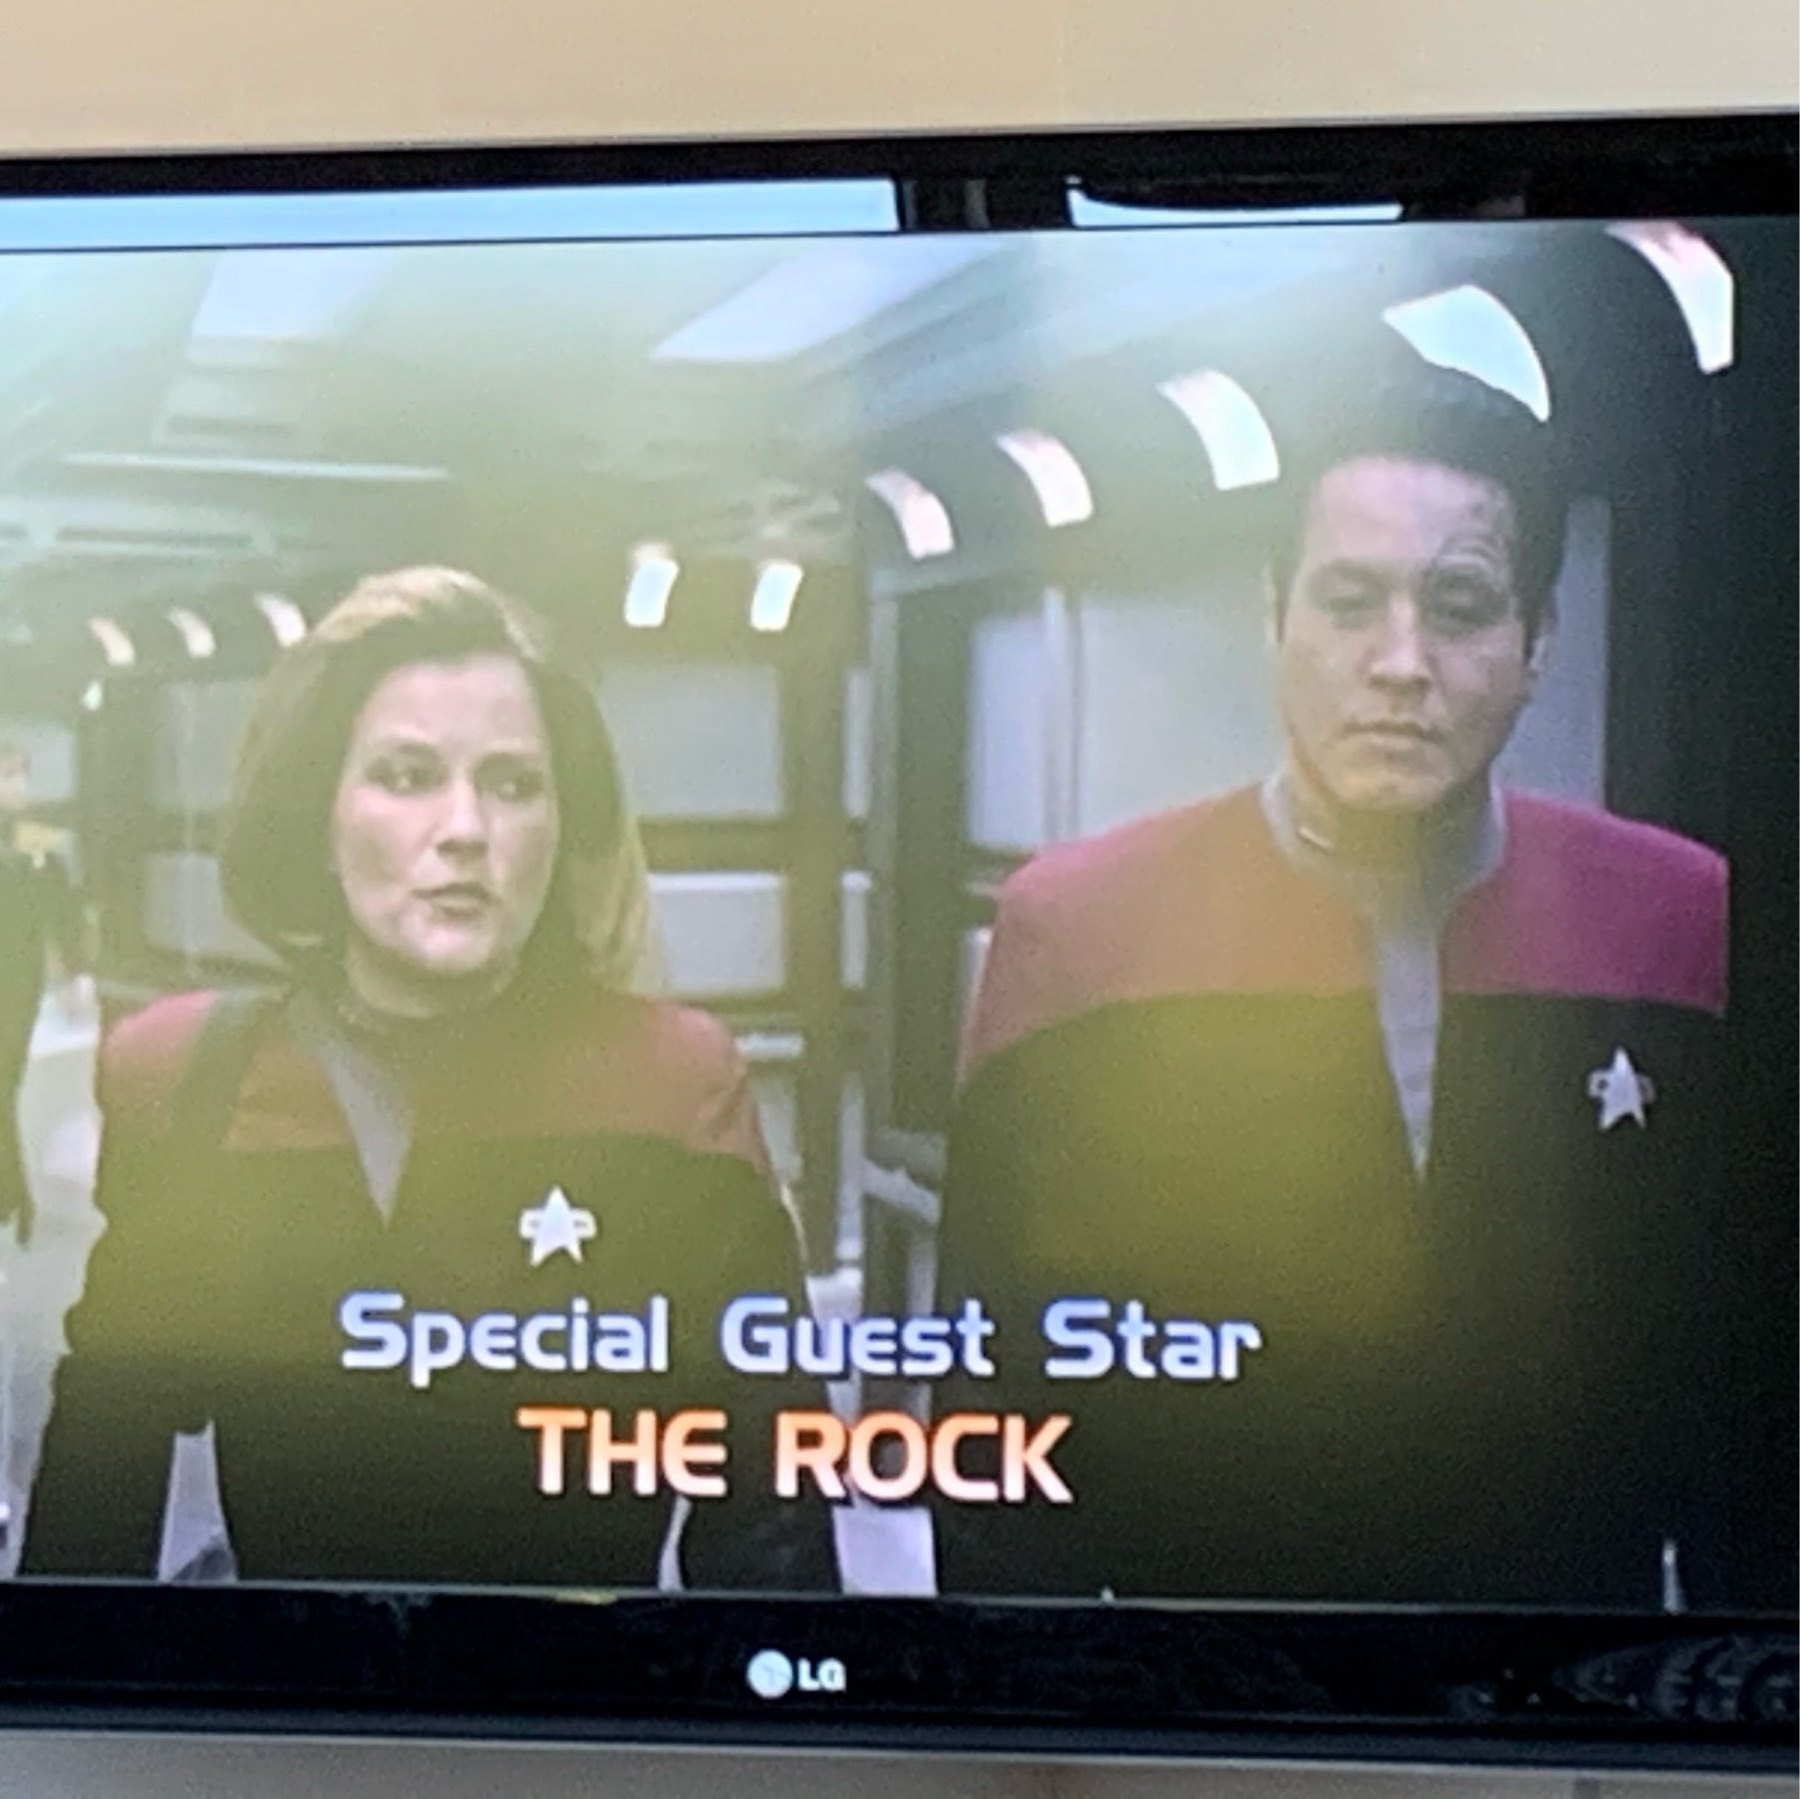 Star if a Star Trek Voyager episode with the opening credits saying Specail Guest Star The Rock